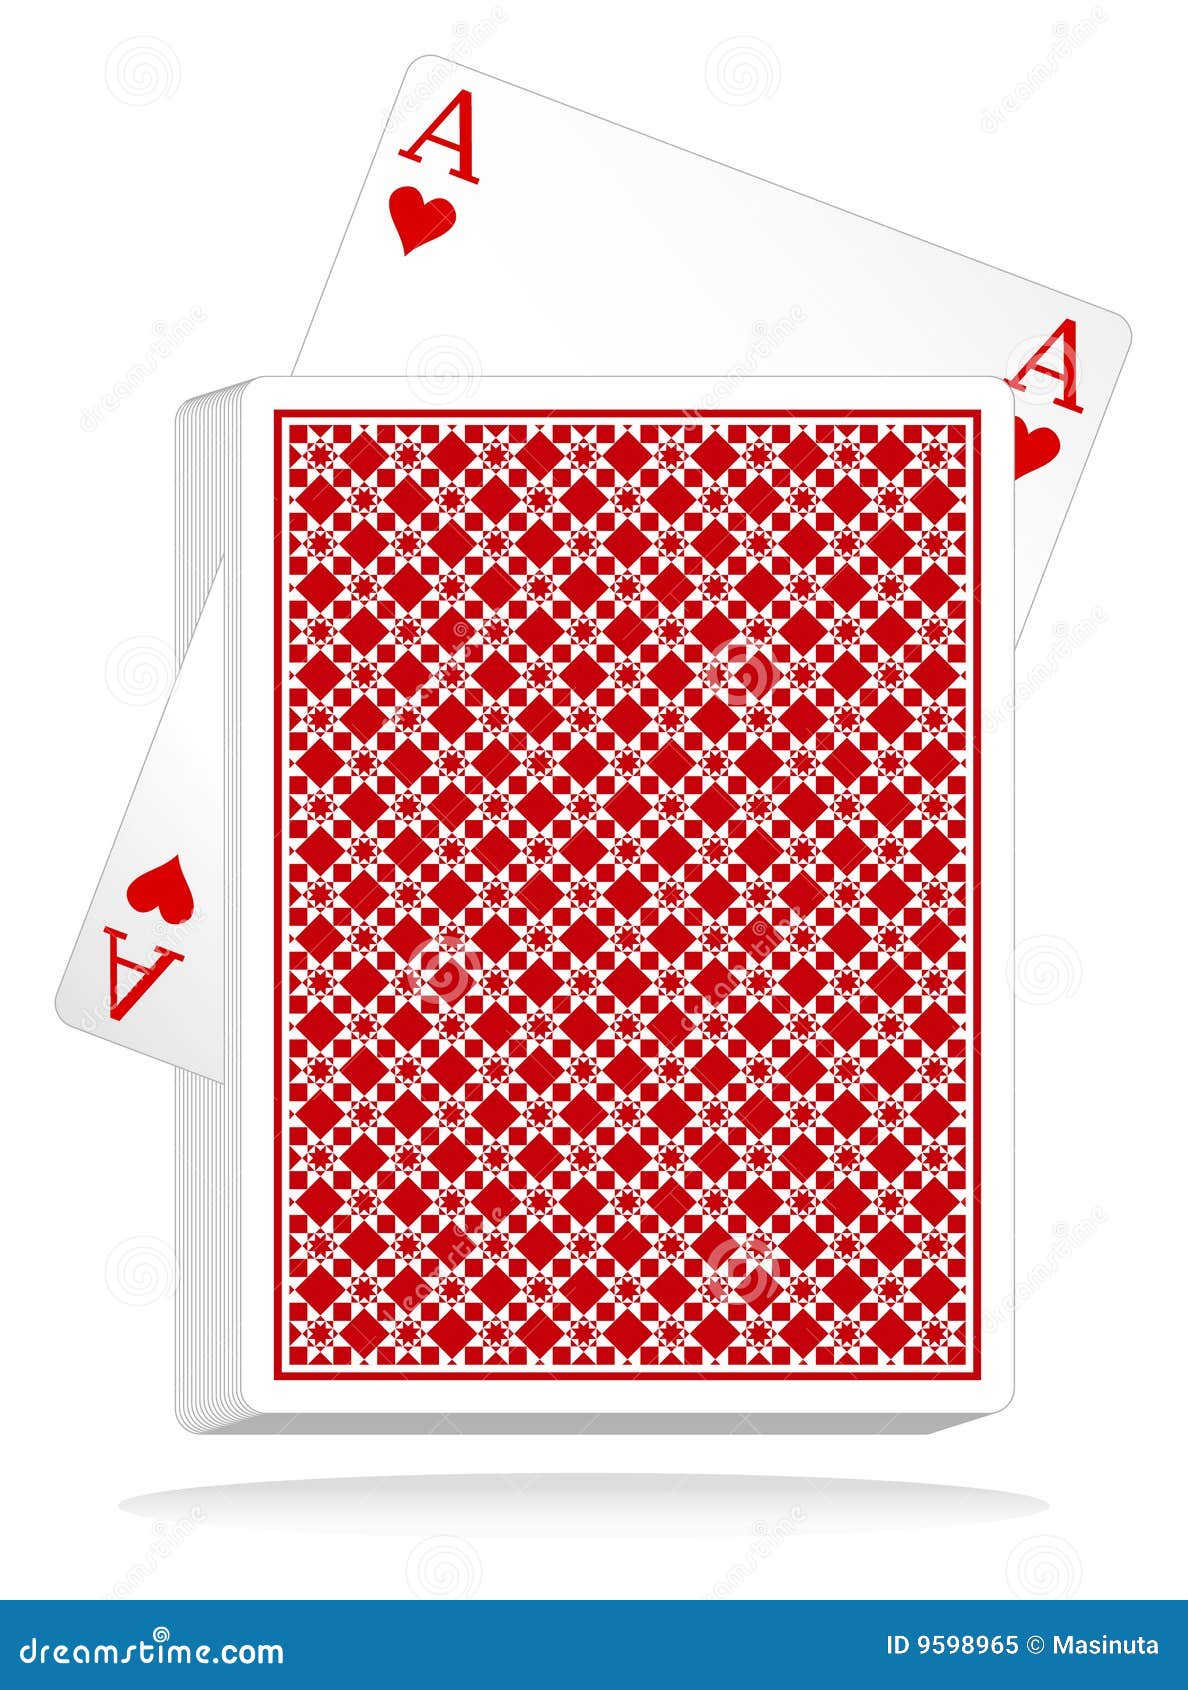 Vector Playing Cards Royalty Free Stock Photo - Image: 9598965